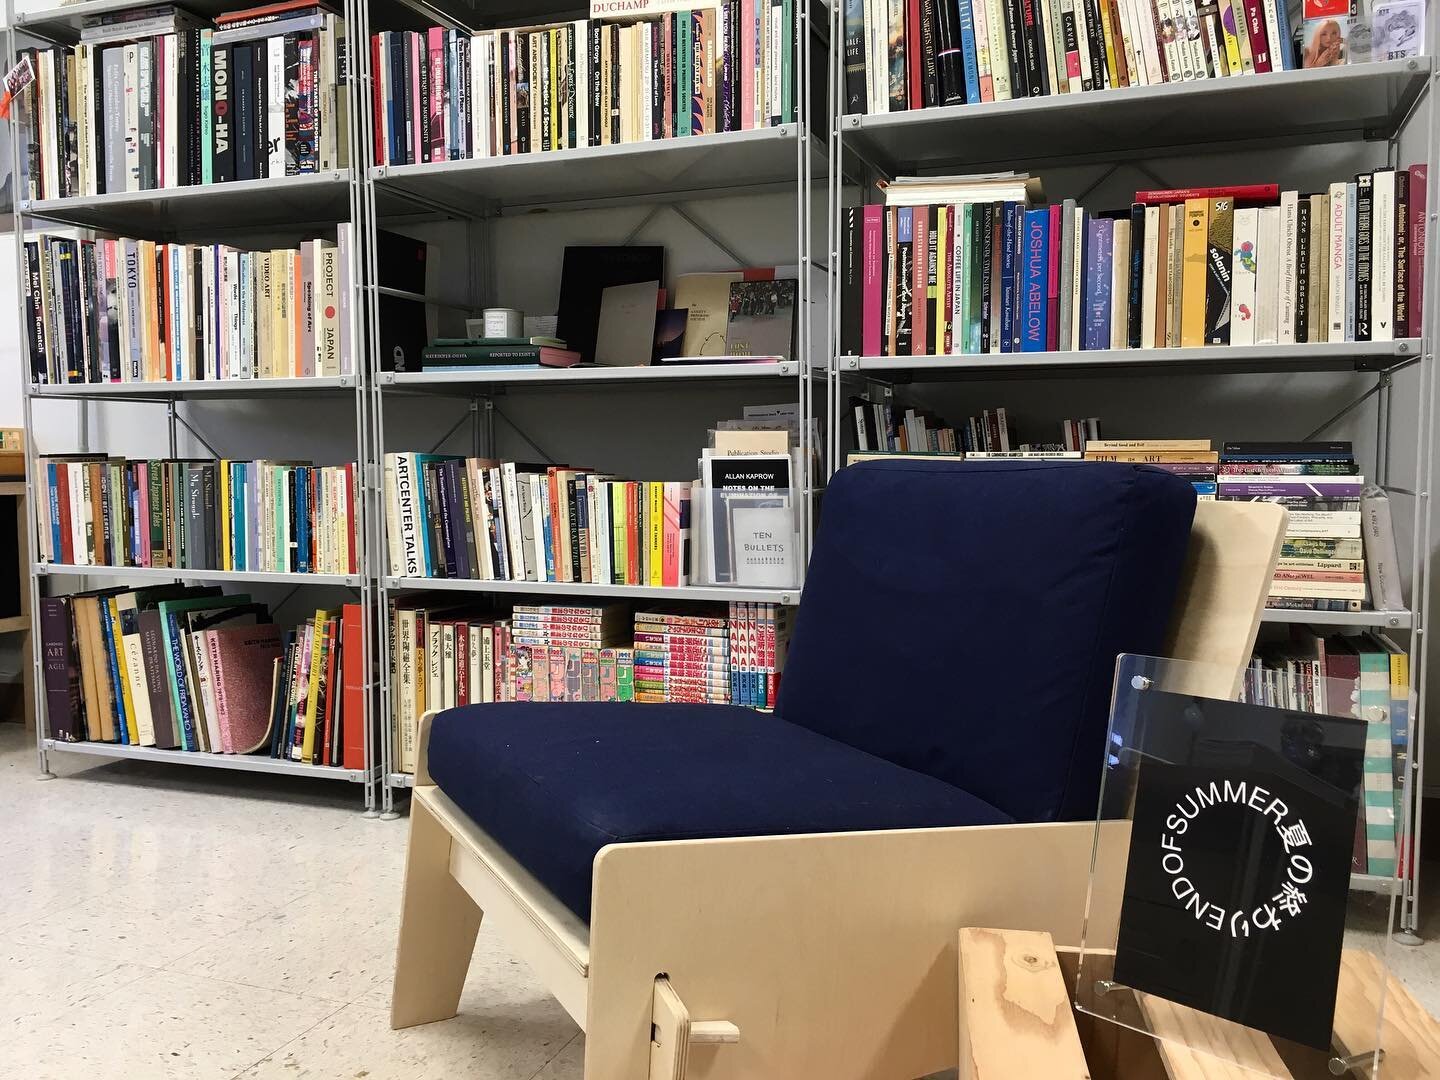 The End of Summer Reading Room in Portland, Oregon is now open by appointment. The Reading Room is intended as a living archive of our residency program, as well as an open resource for information on Contemporary art from Japan.

On view are a selec